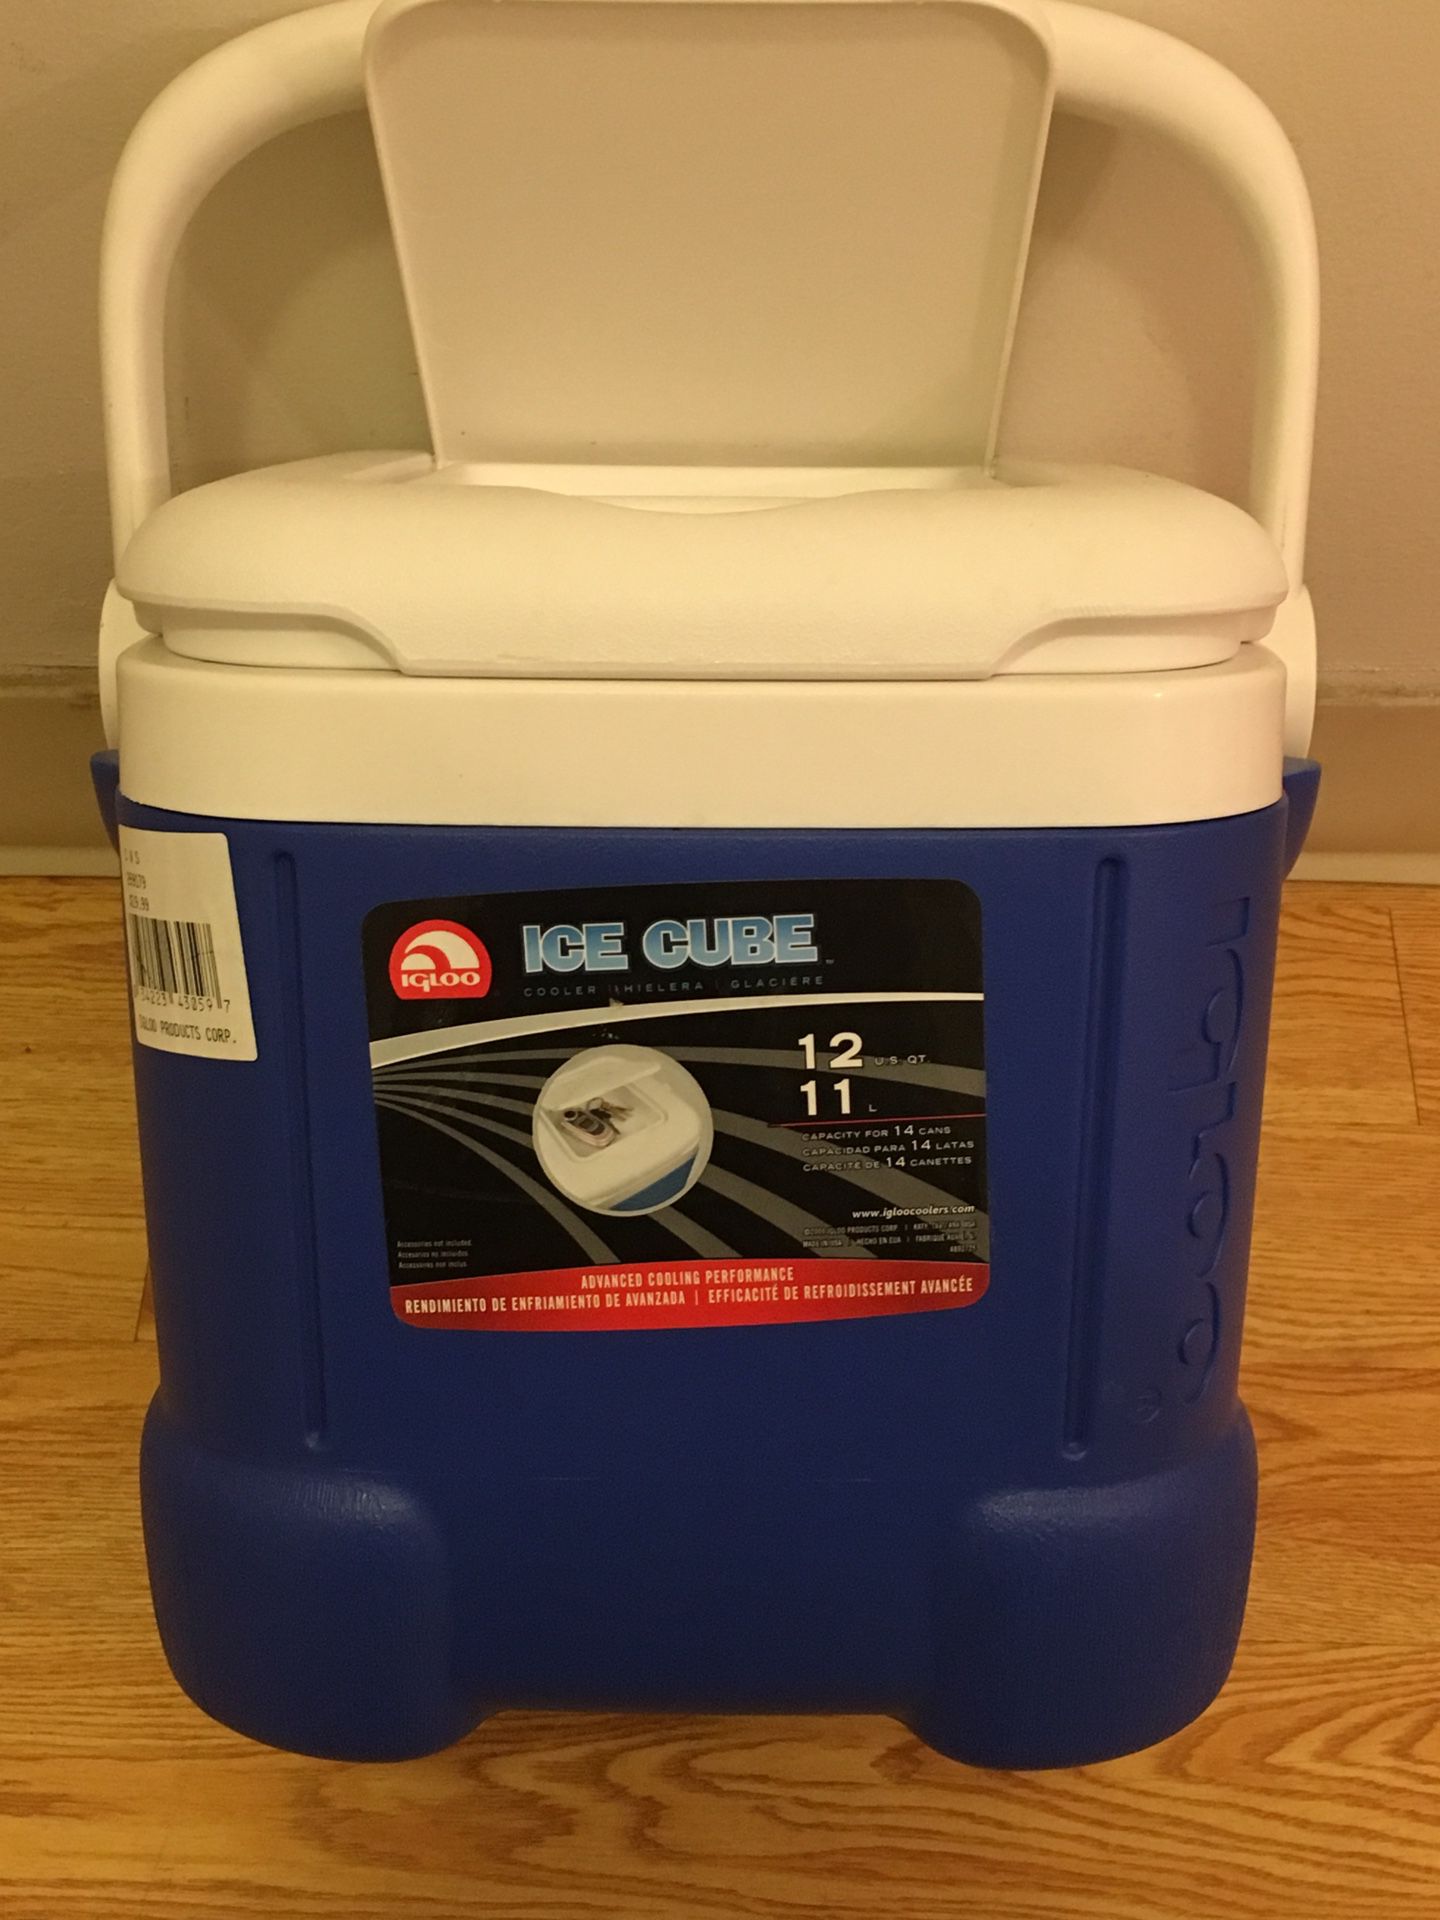 Ice cooler for sale!